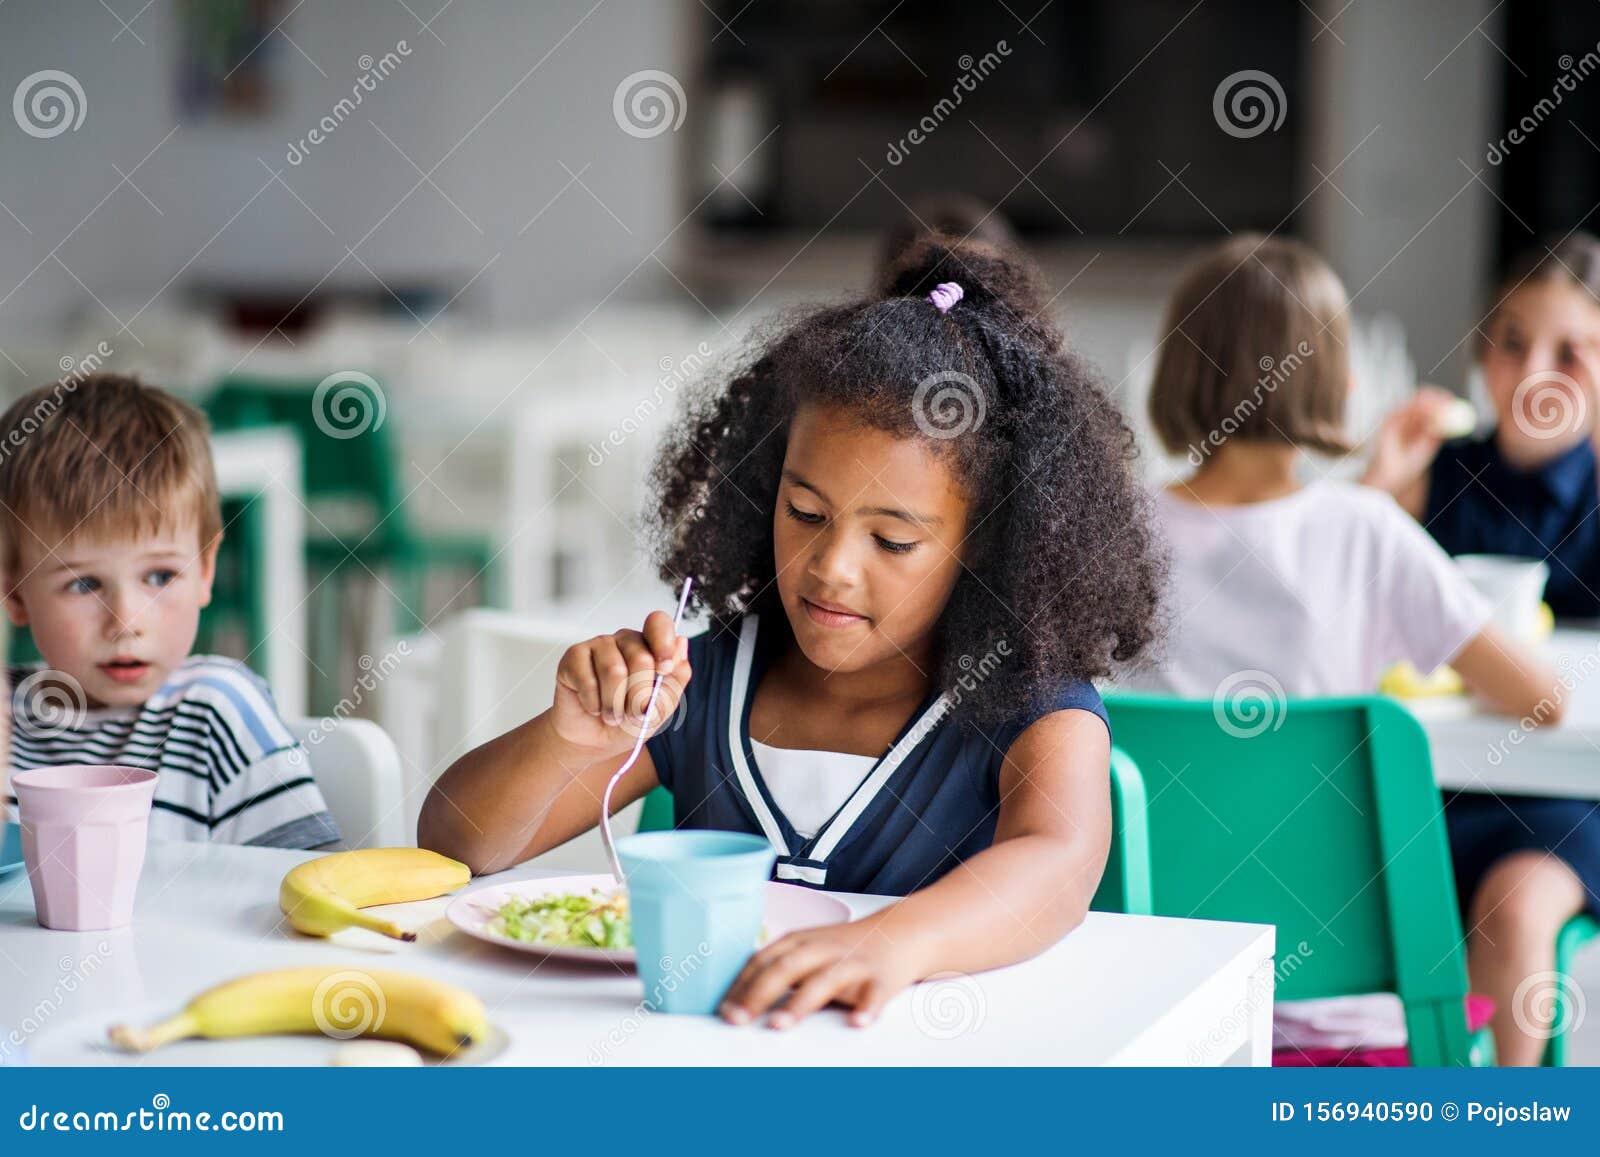 https://thumbs.dreamstime.com/z/group-cheerful-small-school-kids-canteen-eating-lunch-talking-156940590.jpg